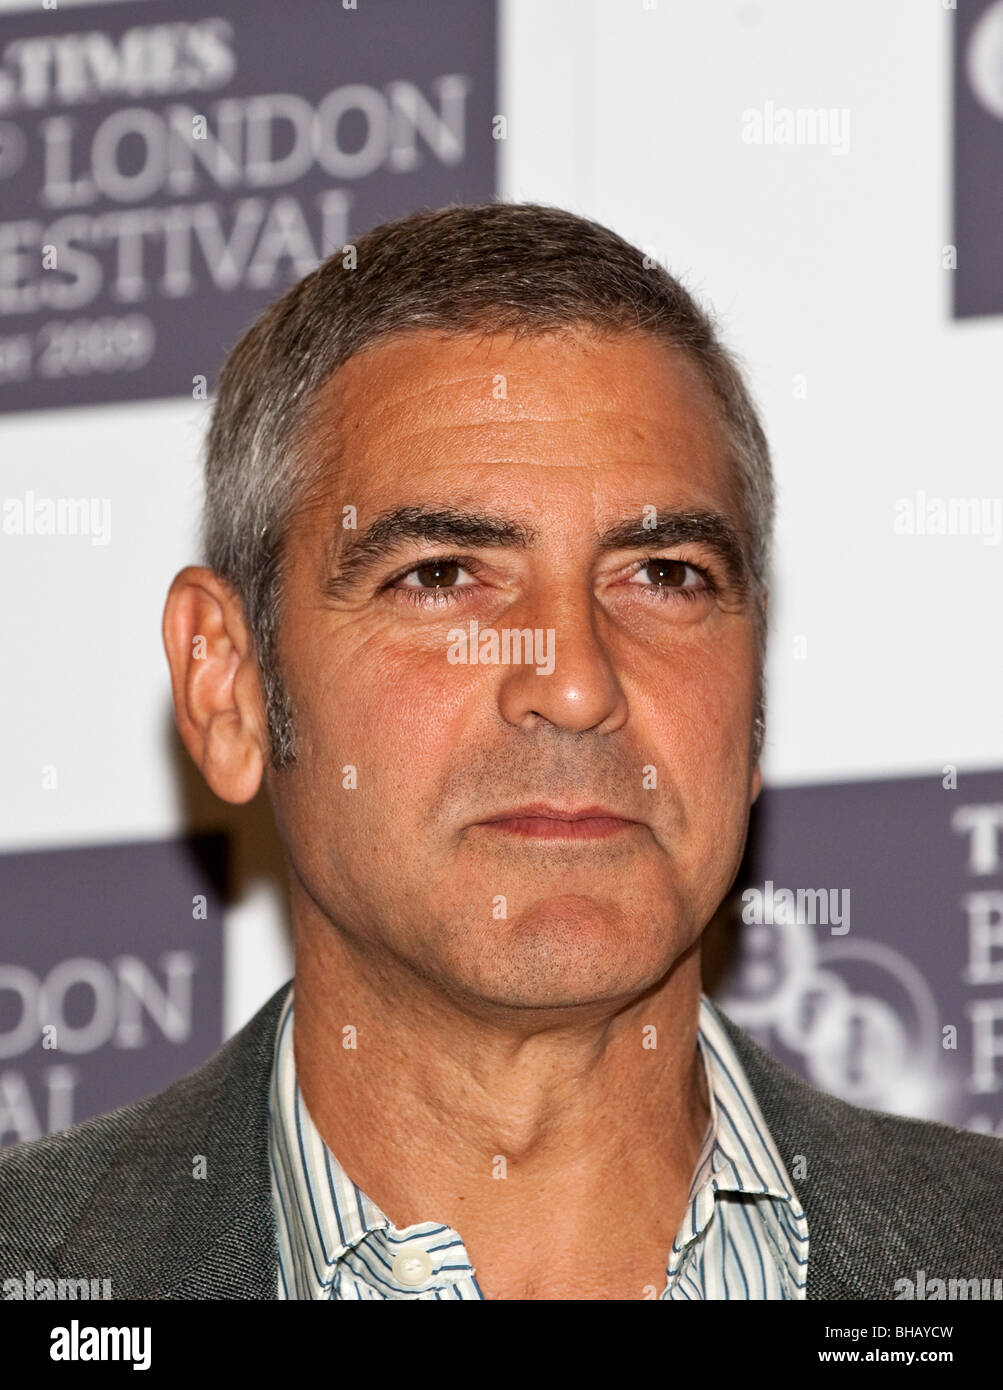 George Clooney attends the Press Conference for 'Fantastic Mr Fox' at the Dorchester Hotel in London. Stock Photo